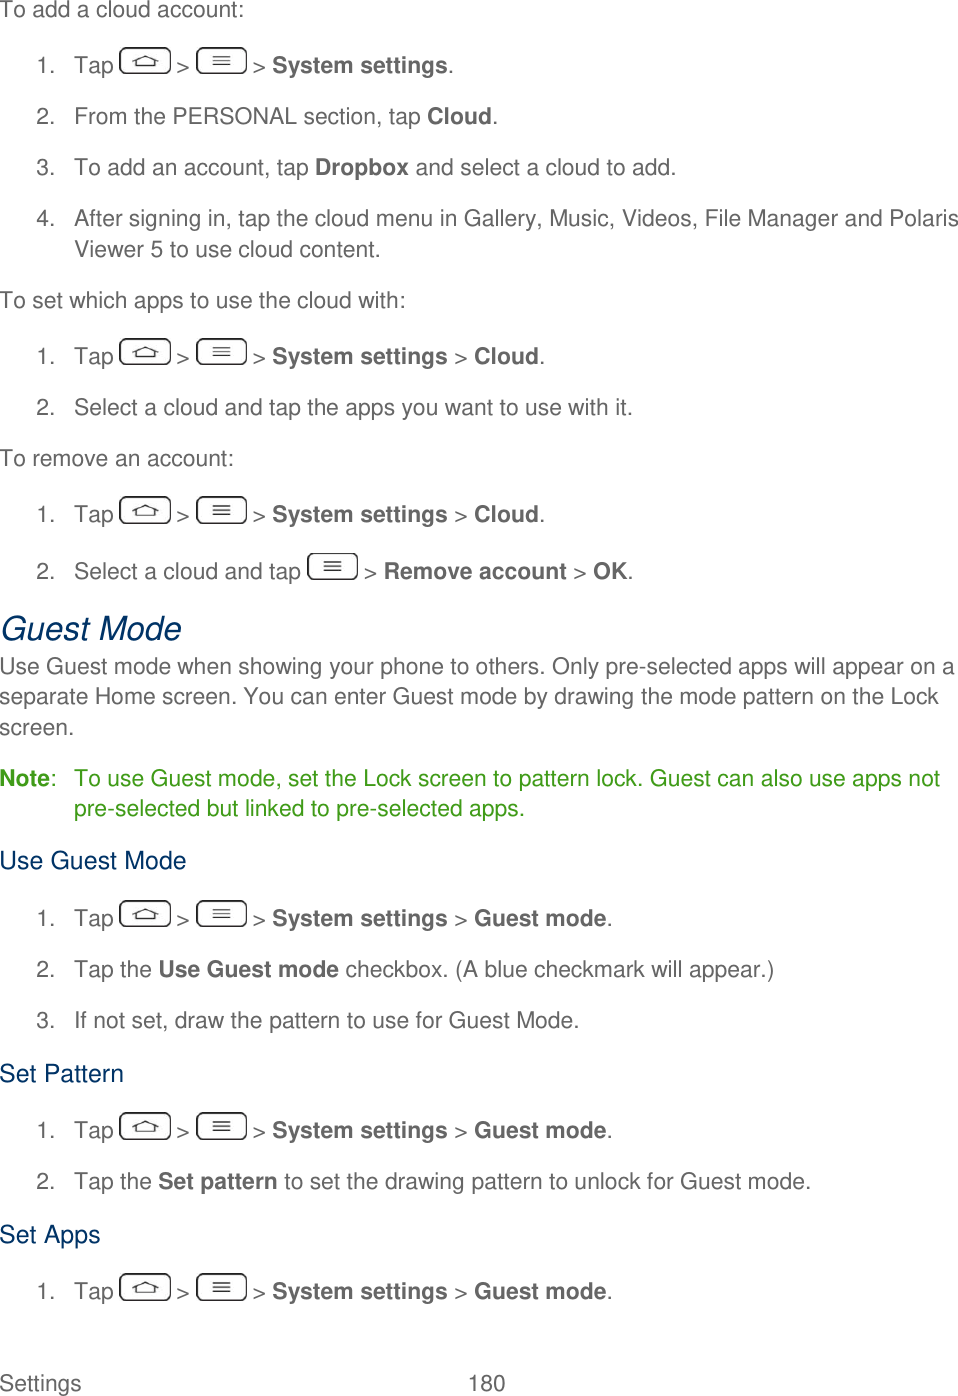  Settings  180   To add a cloud account: 1.  Tap   &gt;   &gt; System settings. 2.  From the PERSONAL section, tap Cloud. 3.  To add an account, tap Dropbox and select a cloud to add.  4.  After signing in, tap the cloud menu in Gallery, Music, Videos, File Manager and Polaris Viewer 5 to use cloud content.  To set which apps to use the cloud with: 1. Tap   &gt;   &gt; System settings &gt; Cloud. 2.  Select a cloud and tap the apps you want to use with it. To remove an account: 1.  Tap   &gt;   &gt; System settings &gt; Cloud.  2.  Select a cloud and tap   &gt; Remove account &gt; OK. Guest Mode Use Guest mode when showing your phone to others. Only pre-selected apps will appear on a separate Home screen. You can enter Guest mode by drawing the mode pattern on the Lock screen. Note:  To use Guest mode, set the Lock screen to pattern lock. Guest can also use apps not pre-selected but linked to pre-selected apps. Use Guest Mode 1.  Tap   &gt;   &gt; System settings &gt; Guest mode. 2.  Tap the Use Guest mode checkbox. (A blue checkmark will appear.) 3.  If not set, draw the pattern to use for Guest Mode. Set Pattern 1.  Tap   &gt;   &gt; System settings &gt; Guest mode. 2.  Tap the Set pattern to set the drawing pattern to unlock for Guest mode. Set Apps 1.  Tap   &gt;   &gt; System settings &gt; Guest mode. 